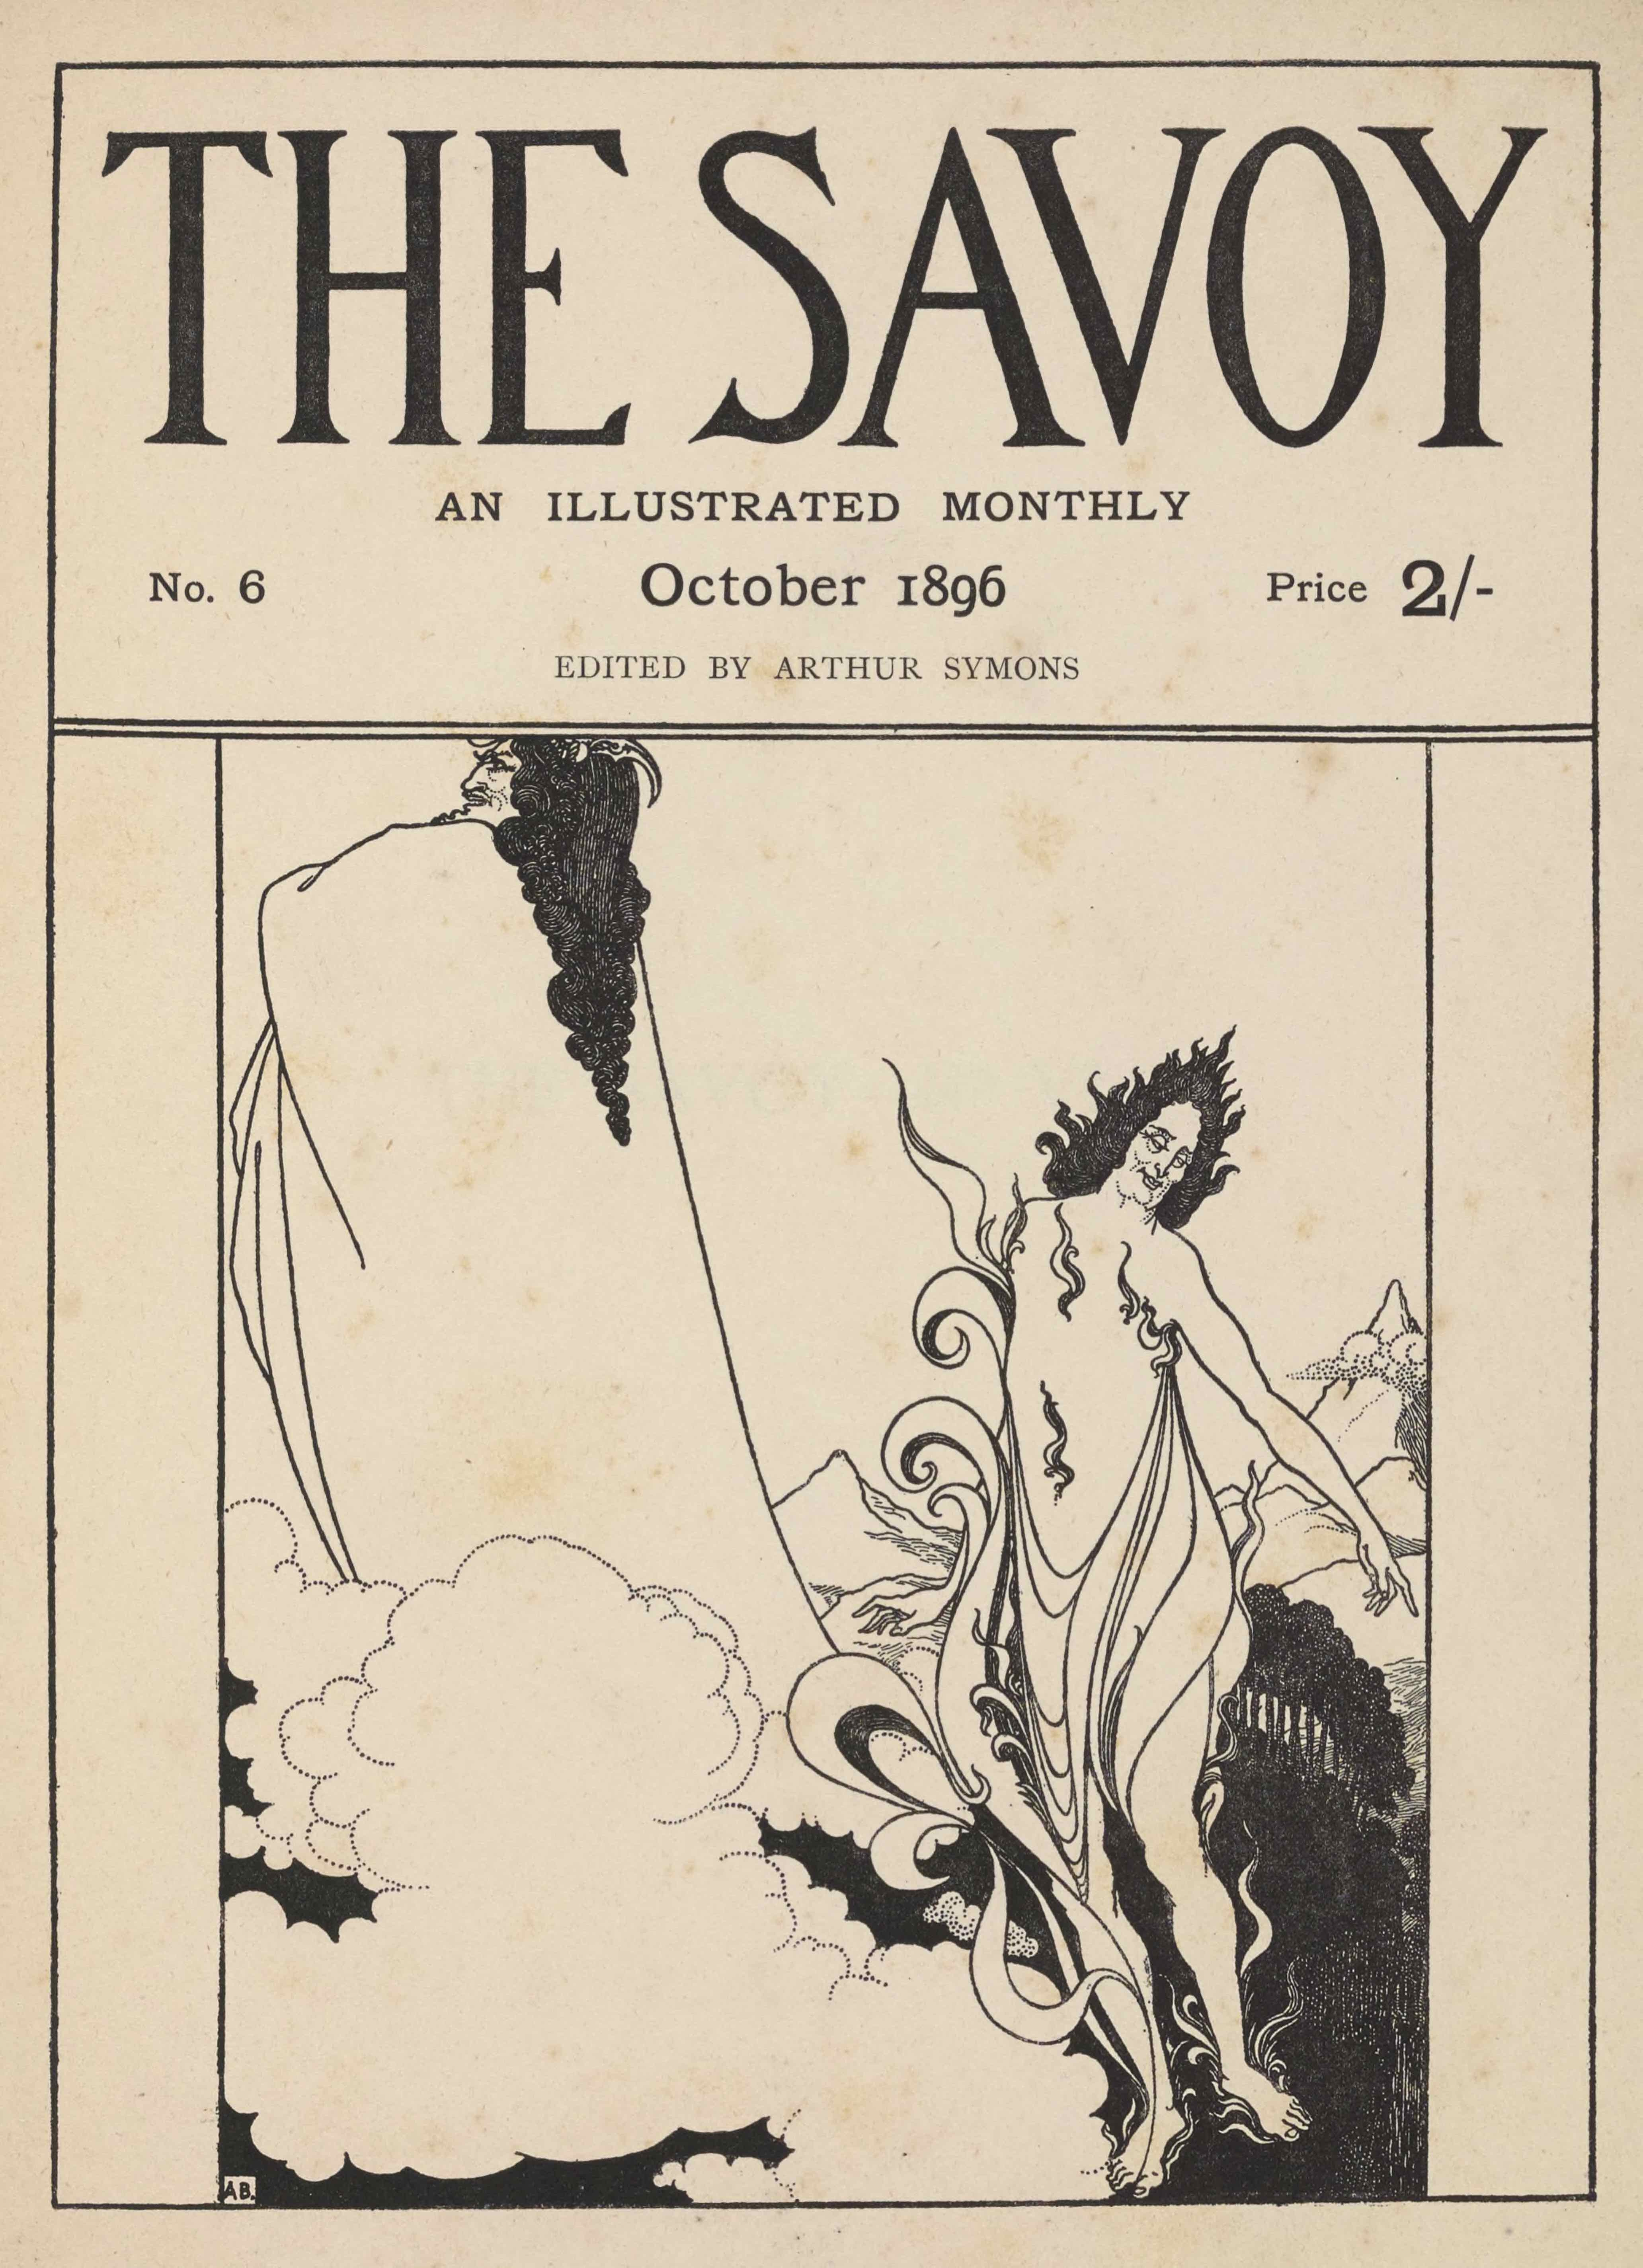 The cover design, in portrait orientation, combines letterpress and a line-block reproduction of a pen-and-ink design by Aubrey Beardsley. The publishing information occupies the top third of the page, followed below by artwork. The page is divided into boxes. At the top, there is a rectangle taking up one-third of the page. Inside the rectangle is the text: “THE SAVOY” [caps] in display type, comprising the top two-thirds of the box in height. Below that text, and centered, set in smaller font, appears: “AN ILLUSTRATED MONTHLY” [caps]. In the line below that there is small text aligned to the left side that says: “No. 6”. In the same line, centred, is the text: “October 1896”. In the same line, right aligned, there is the text: “Price 2/-”. One line below and centered the letterpress reads: “EDITED BY ARTHUR SYMONS” [caps]. The artwork below is of two supernatural figures floating above a landscape; they appear to be characters from Wagner’s opera, Das Rheingold, Loge, the god of fire, and Wotan, king of the gods (compare Savoy volume 2 pa 193). .The supernatural figure in the foreground is on the right side of the page and takes up about half the framed space in height. Its bare feet rest on the bottom frame of the illustration. It floats just to the right of a cloud that occupies the centre bottom left of the picture frame. It is, facing towards the viewer, with its head turned left and its left arm pointing out to the right edge of the illustration. It is wearing a loose robe: the fabric wraps around its legs and across its midsection, pinned on both sides by the armpits. The robe is made out of draped fabric. Small flames spread across the figure’s torso. One larger flame extends from the figure’s right foot up to just past its right shoulder. The figure has black hair that is divided into smaller flame--like strands, which come to a point sticking directly up at the crown of its head. To the right behind the figure is a grove of trees, tightly packed and thick with leaves. Behind this grove stands rolling foothills that lead to a sharply peaked mountain on the right edge of the page, halfway up from the bottom of the page. Behind and to the left of the figure stands another jagged peak, but this one is about half the size of the other, and doesn’t rise so sharply. To the left of the first figure are puffy rounded clouds that extend to the left edge of the page, and continue upwards to just cover about one-quarter of the page. From amongst these clouds arises the second supernatural figure, located behind and to the left of the first. It extends to the very top and left edges of the artwork, its head resting just below the banner of publishing information. It is facing towards the left, with its body turned away from the viewer. It is wearing a long robe that covers the entirety of its body, but it is held up in such a way to suggest that its arms are crossed high up on its chest. It has long curled black hair that reaches halfway down its back, tapering to a point. Its face is in profile, with a pointed chin and defined nose. In its hair it has what might be a horn that curves back, or a type of hair accessory. In the bottom left corner a white box contains the black initials of the artist: A.B.